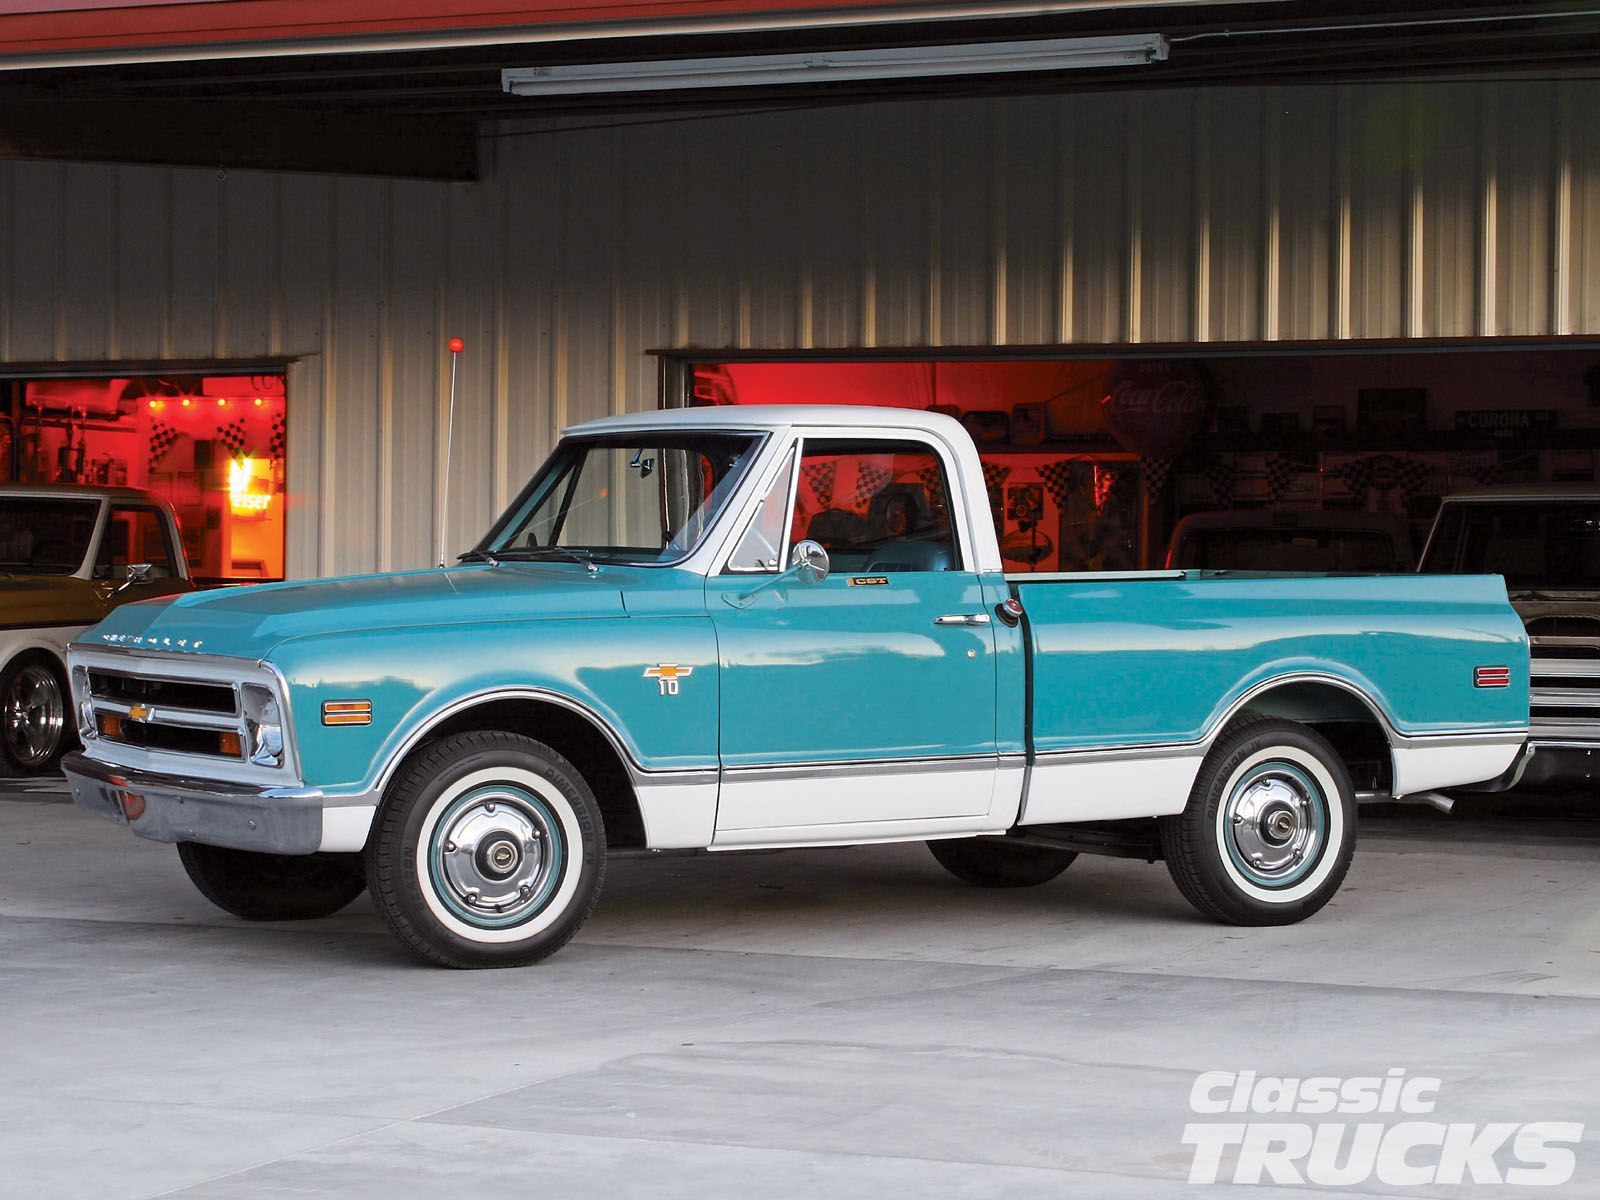 Chevy C10 a Great Color! I just might have to restore